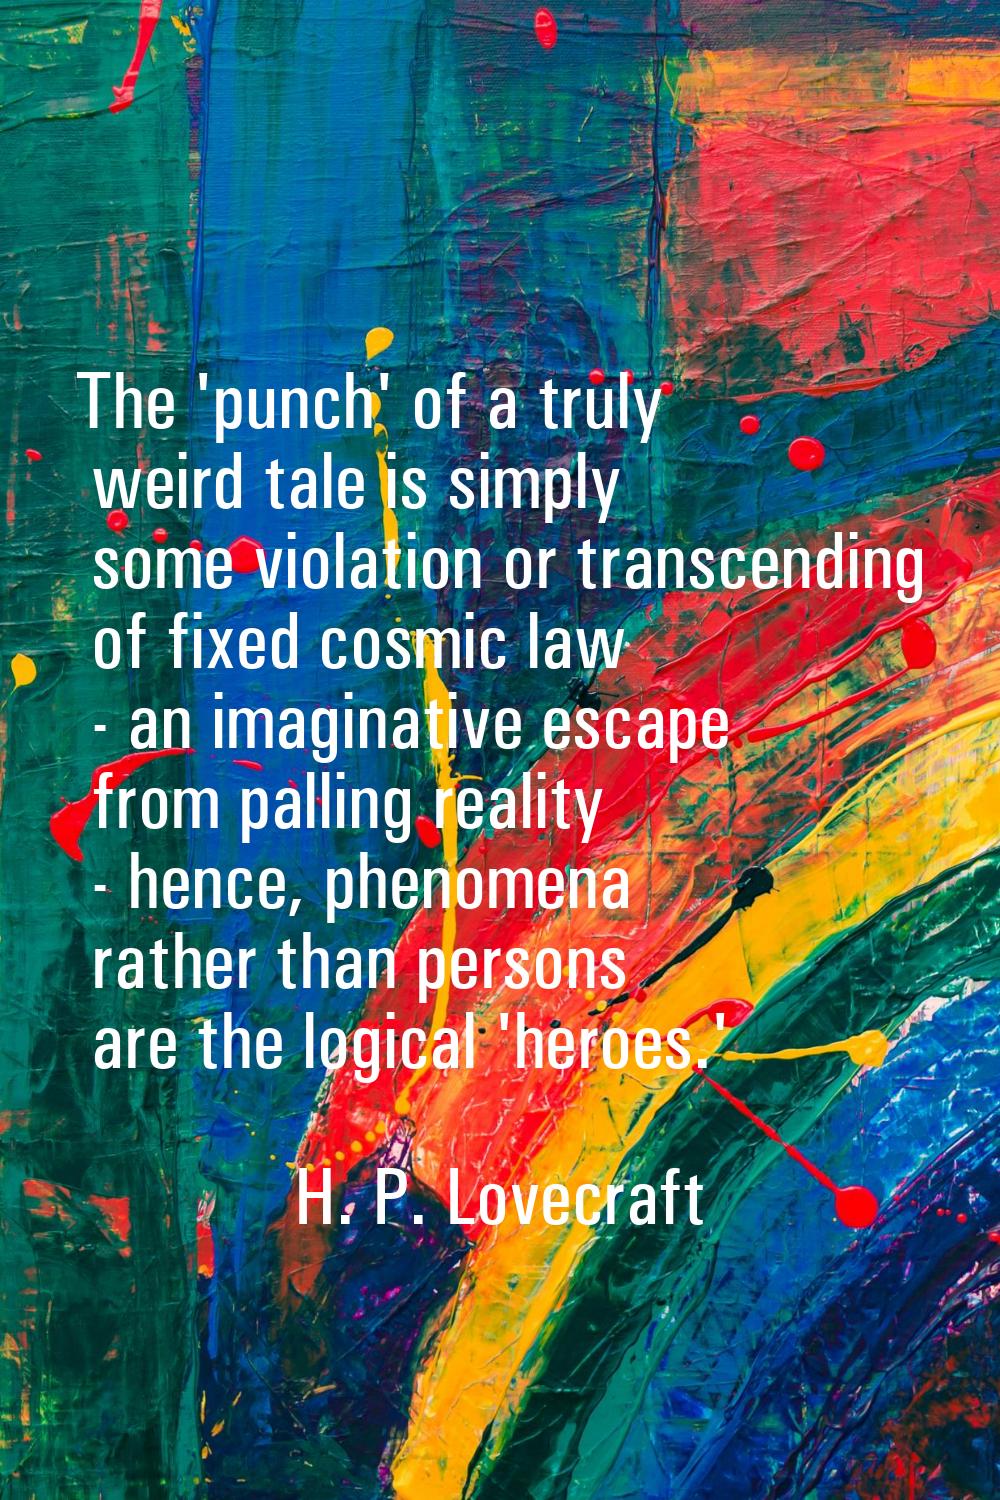 The 'punch' of a truly weird tale is simply some violation or transcending of fixed cosmic law - an